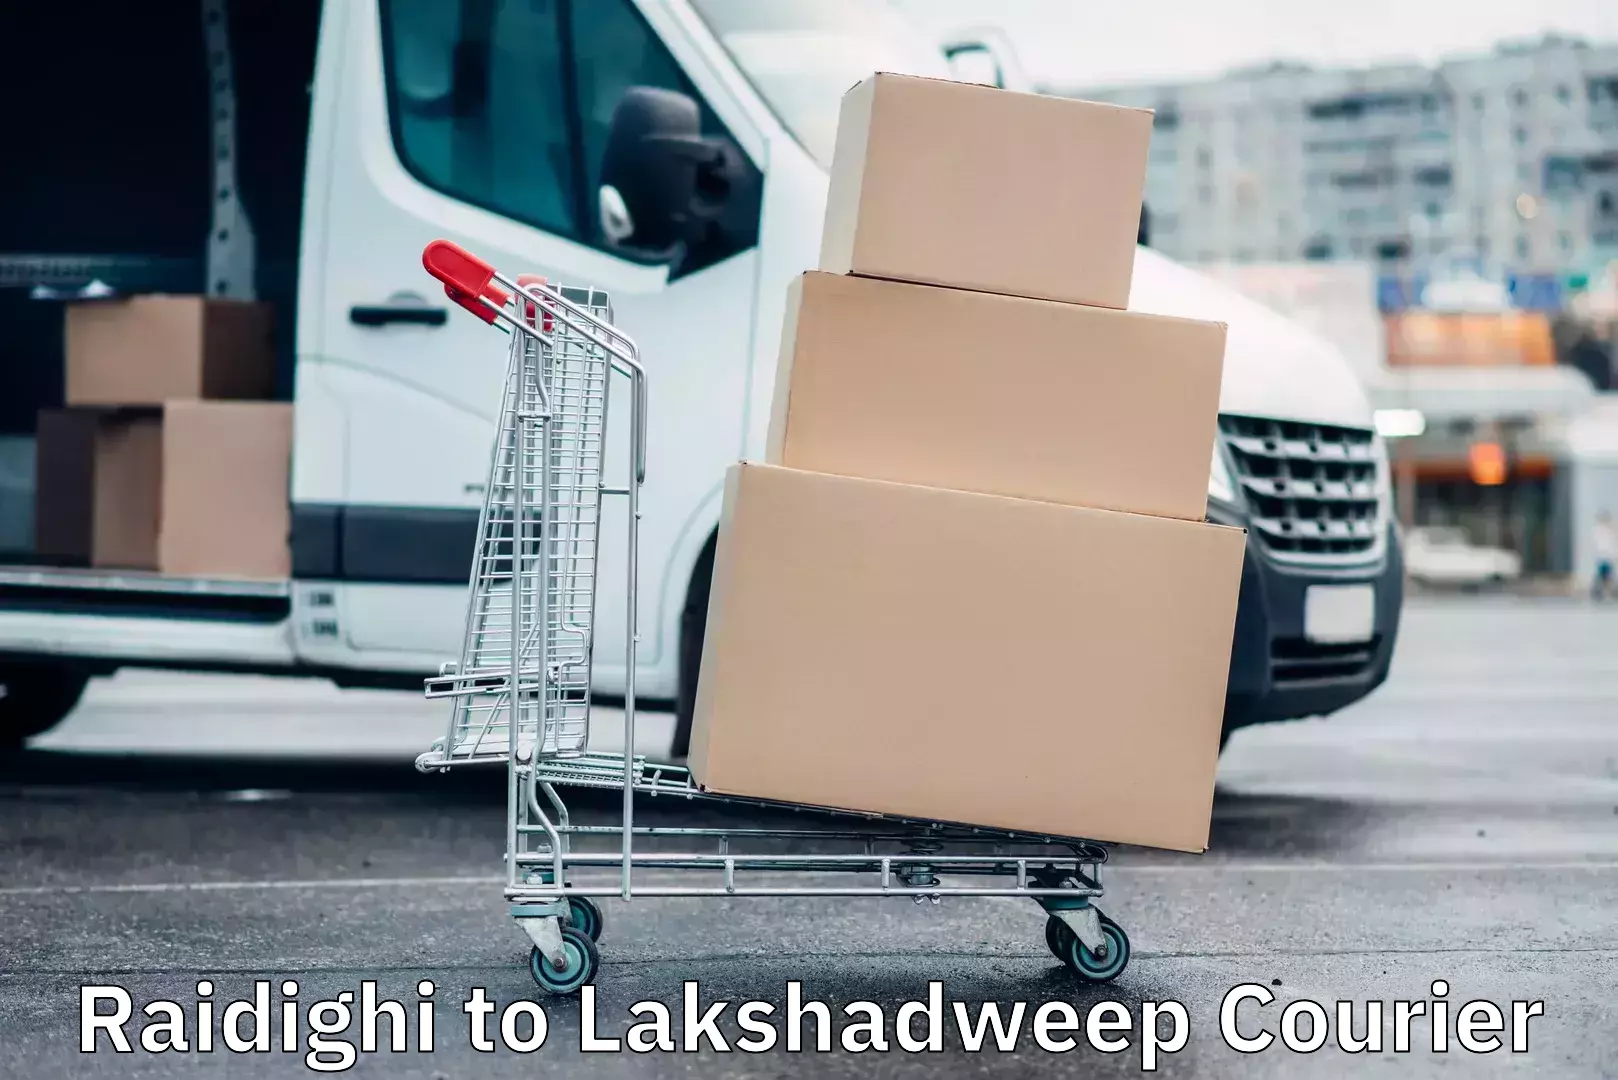 Customer-oriented courier services Raidighi to Lakshadweep